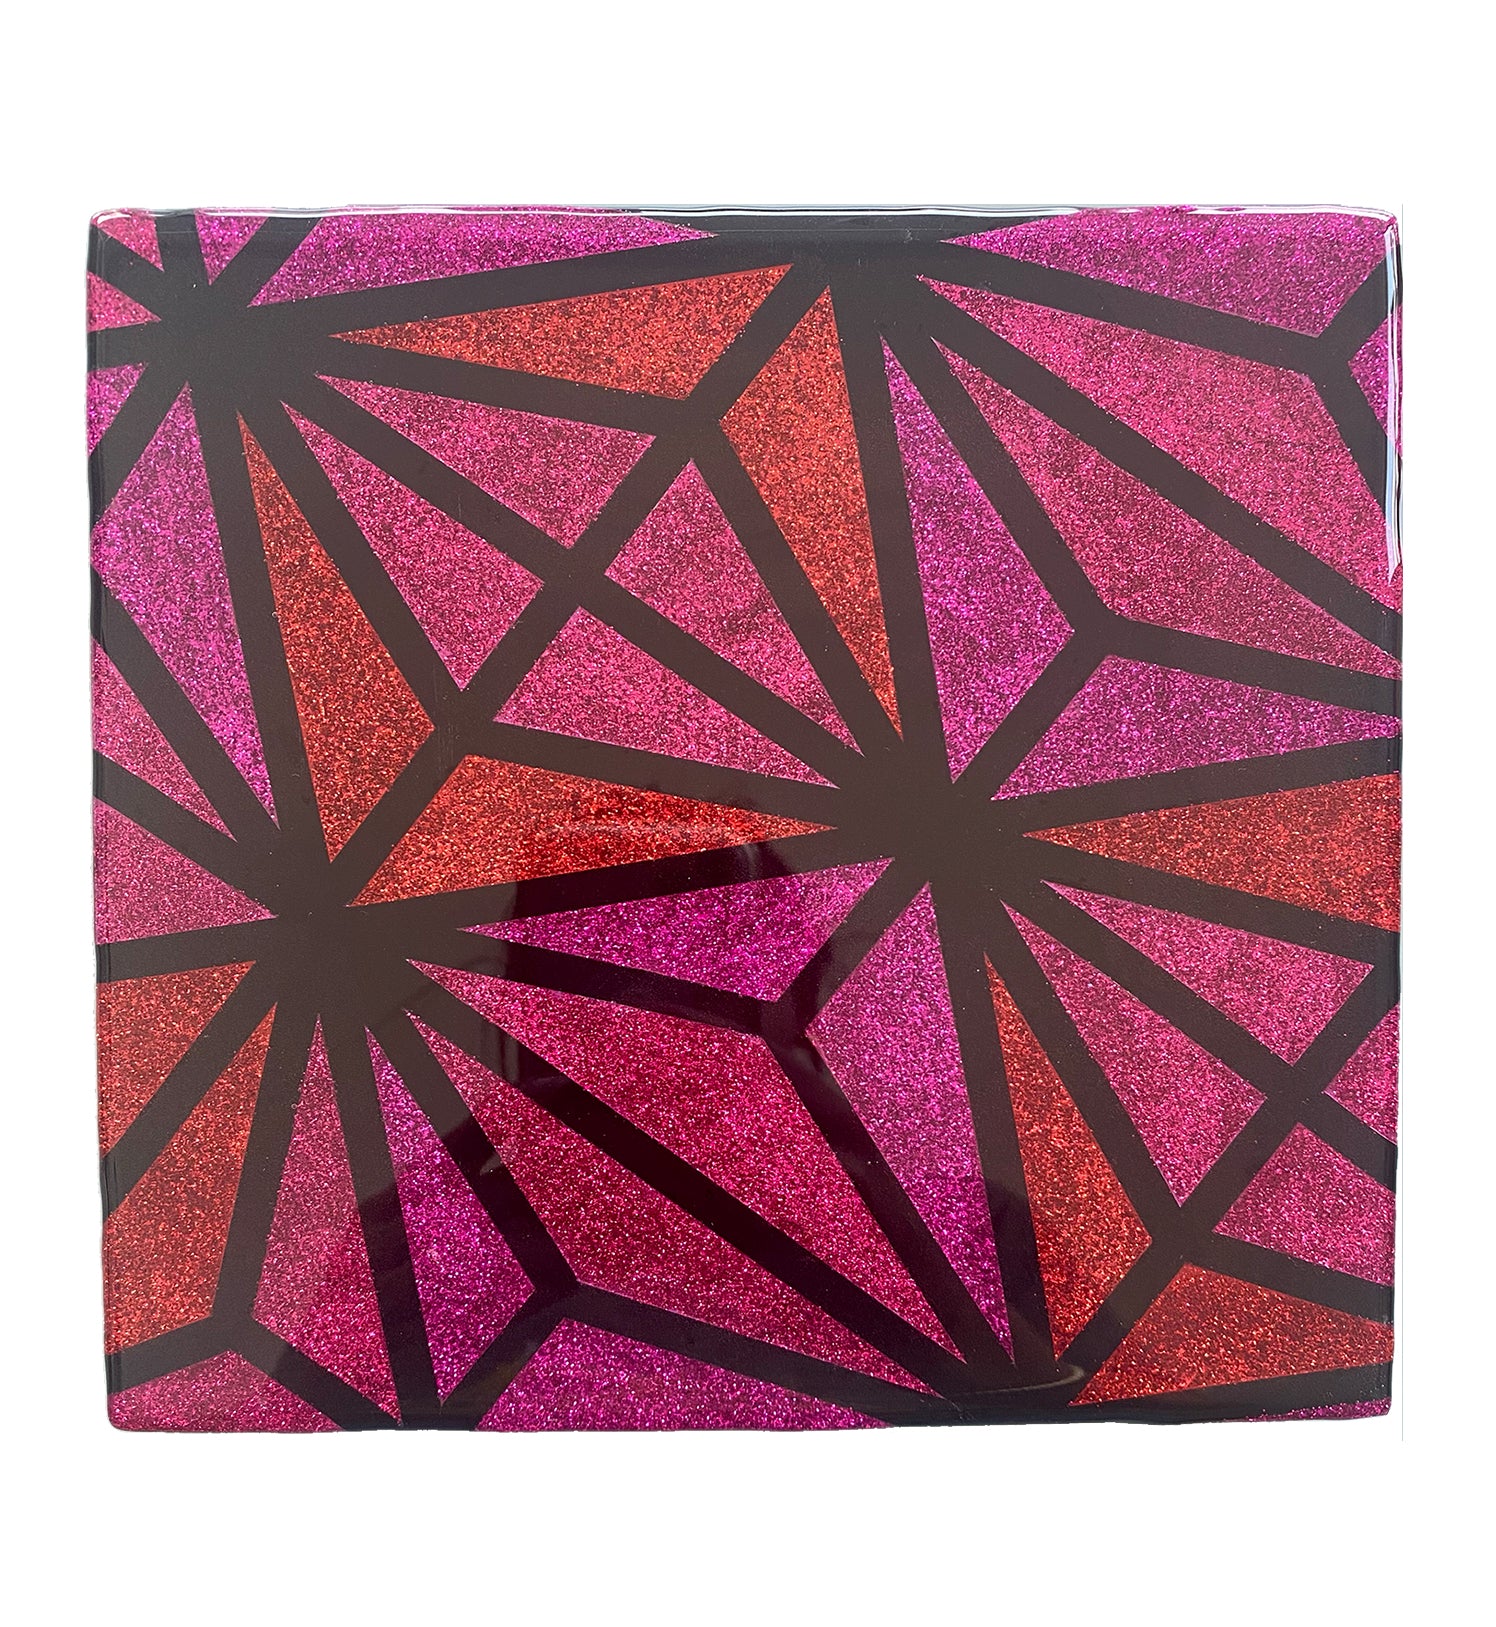 Pink Glitter – Care and Media Mixed Art Resin Geometric Wall Triangles Devils May